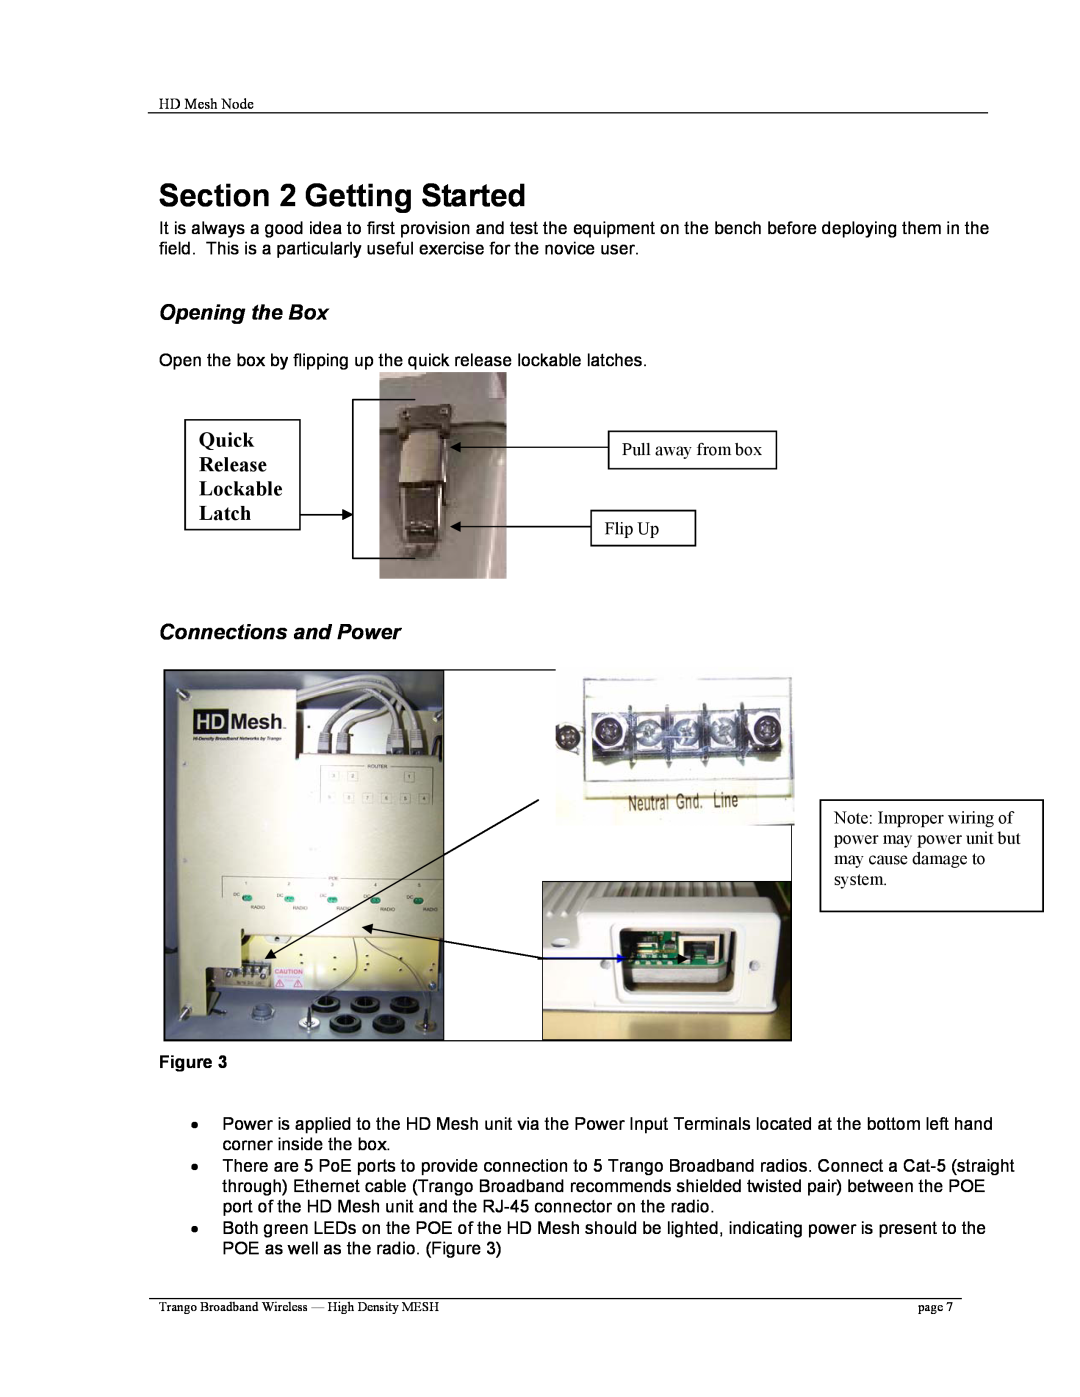 Trango Broadband High Density Mesh System user manual Getting Started, Opening the Box, Quick Release Lockable Latch 